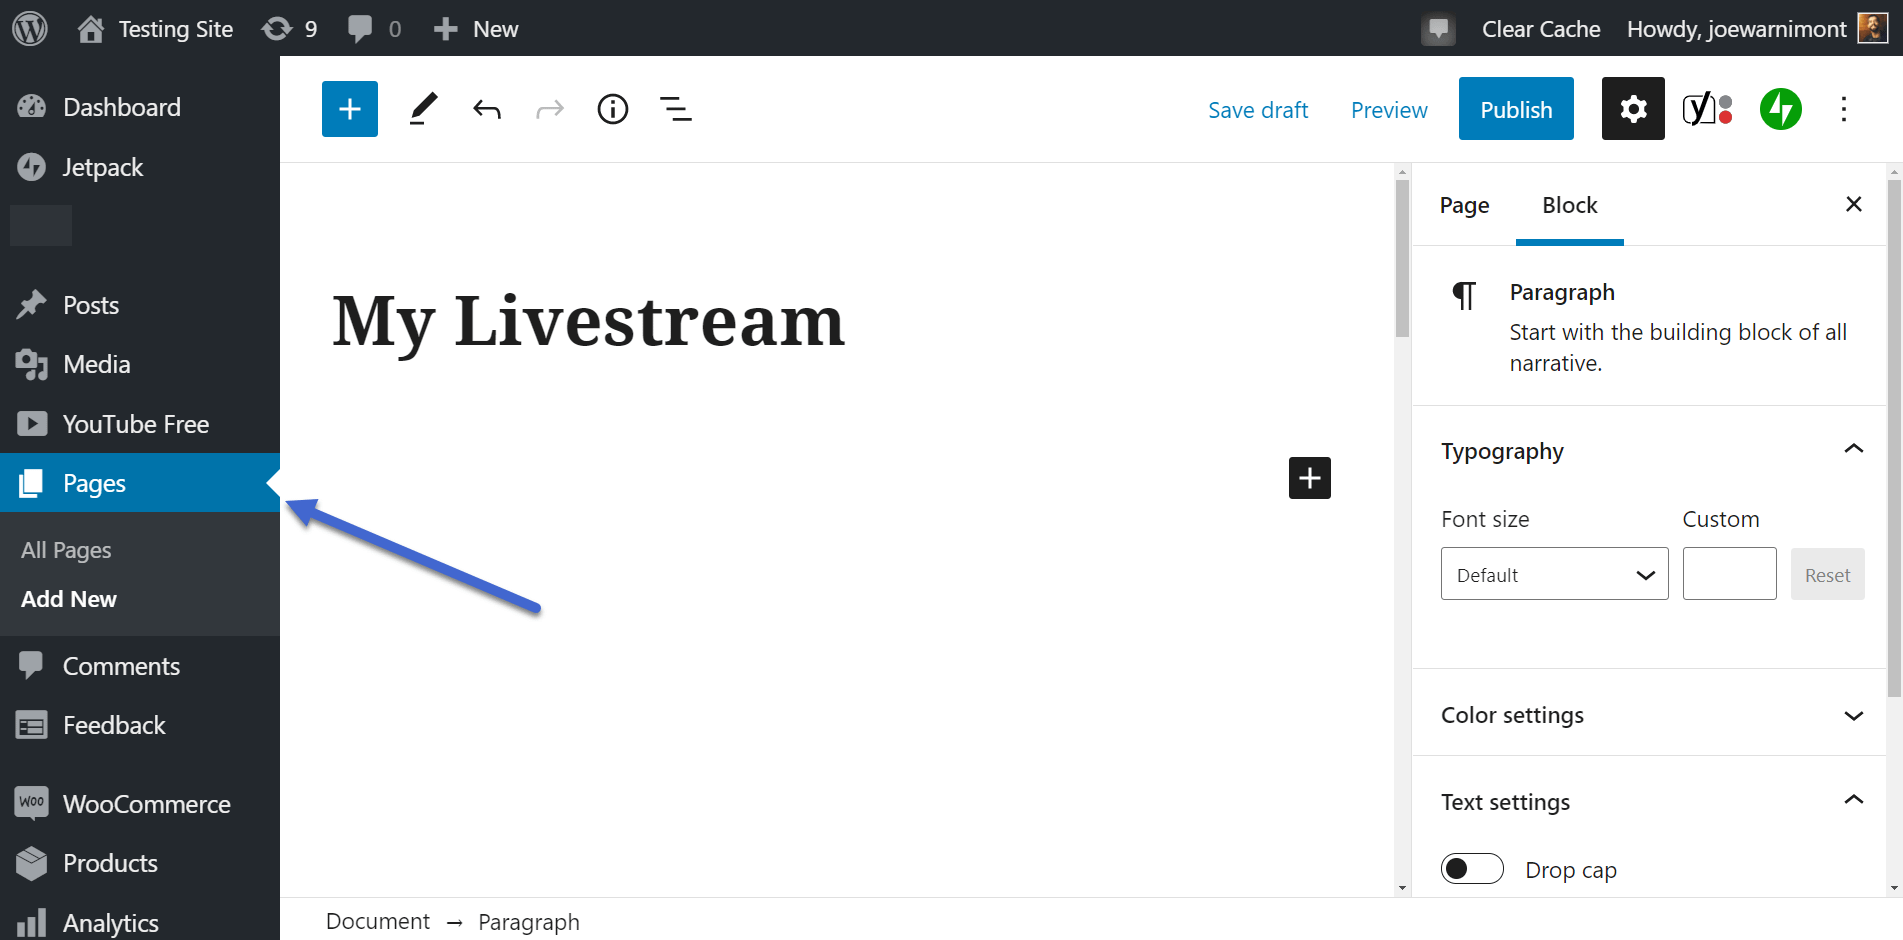 pages - WordPress Live Streaming